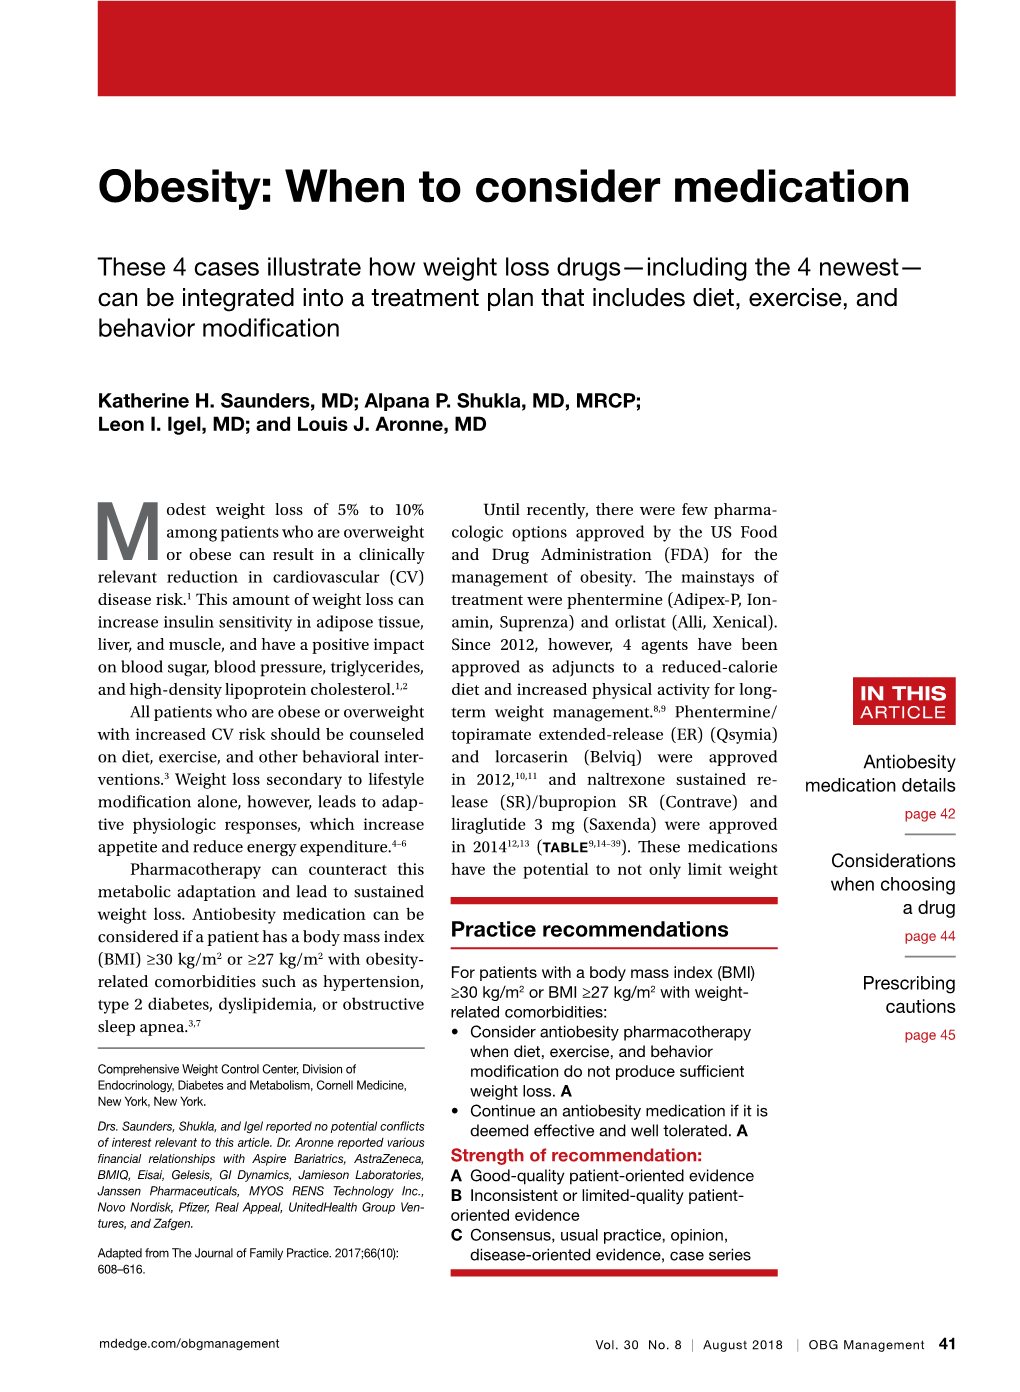 Obesity: When to Consider Medication